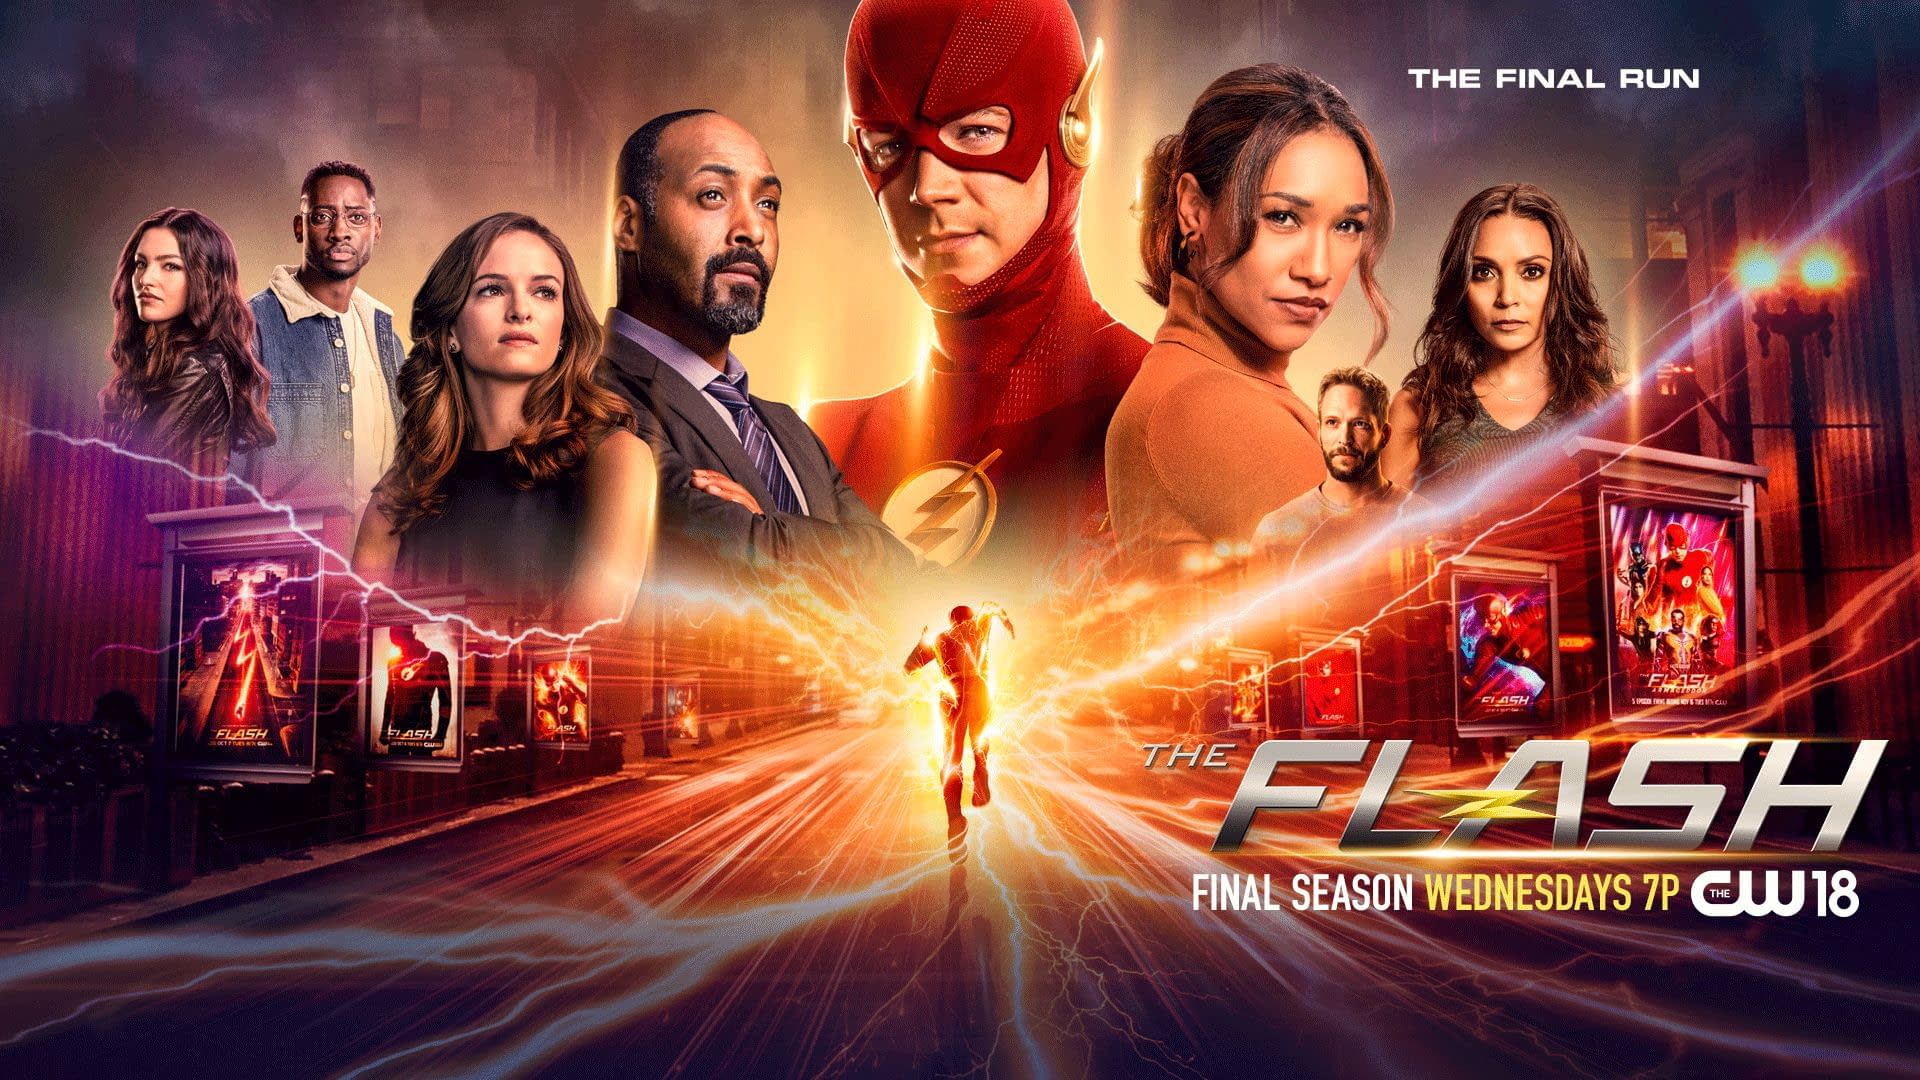 The Flash Series Will Have a Four-Part Series Finale 